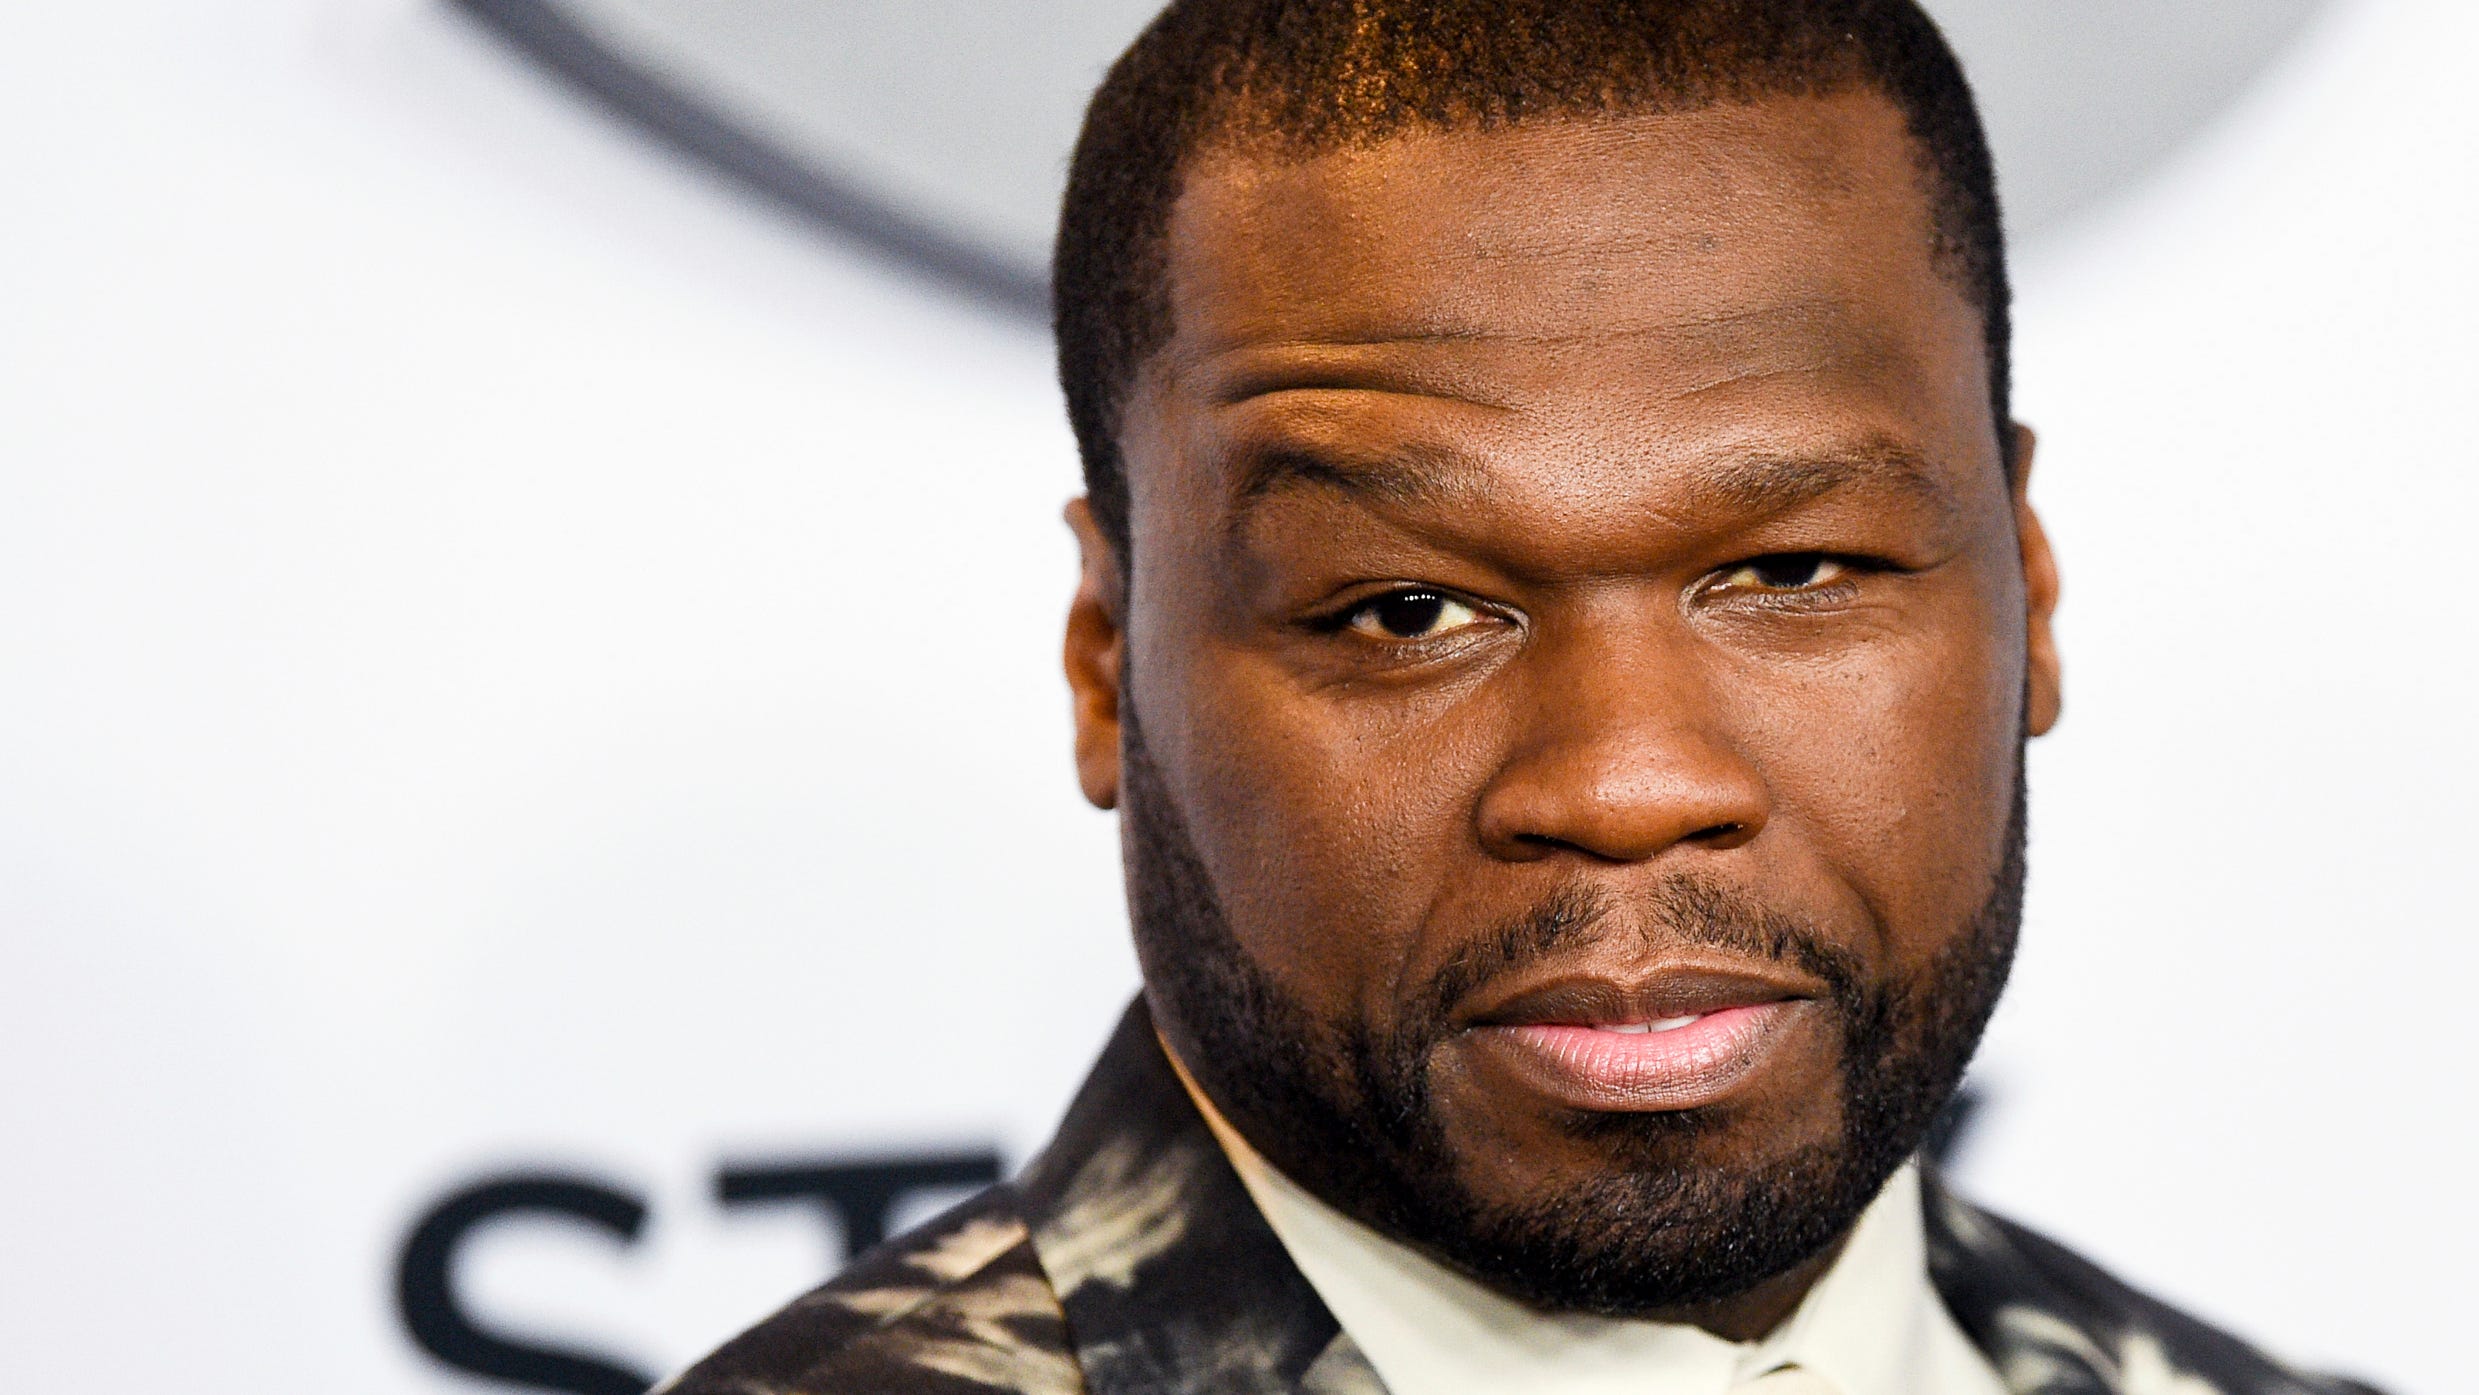 50 Cent: Curtis Jackson on 'Power' finale, spinoffs and 'For Life'